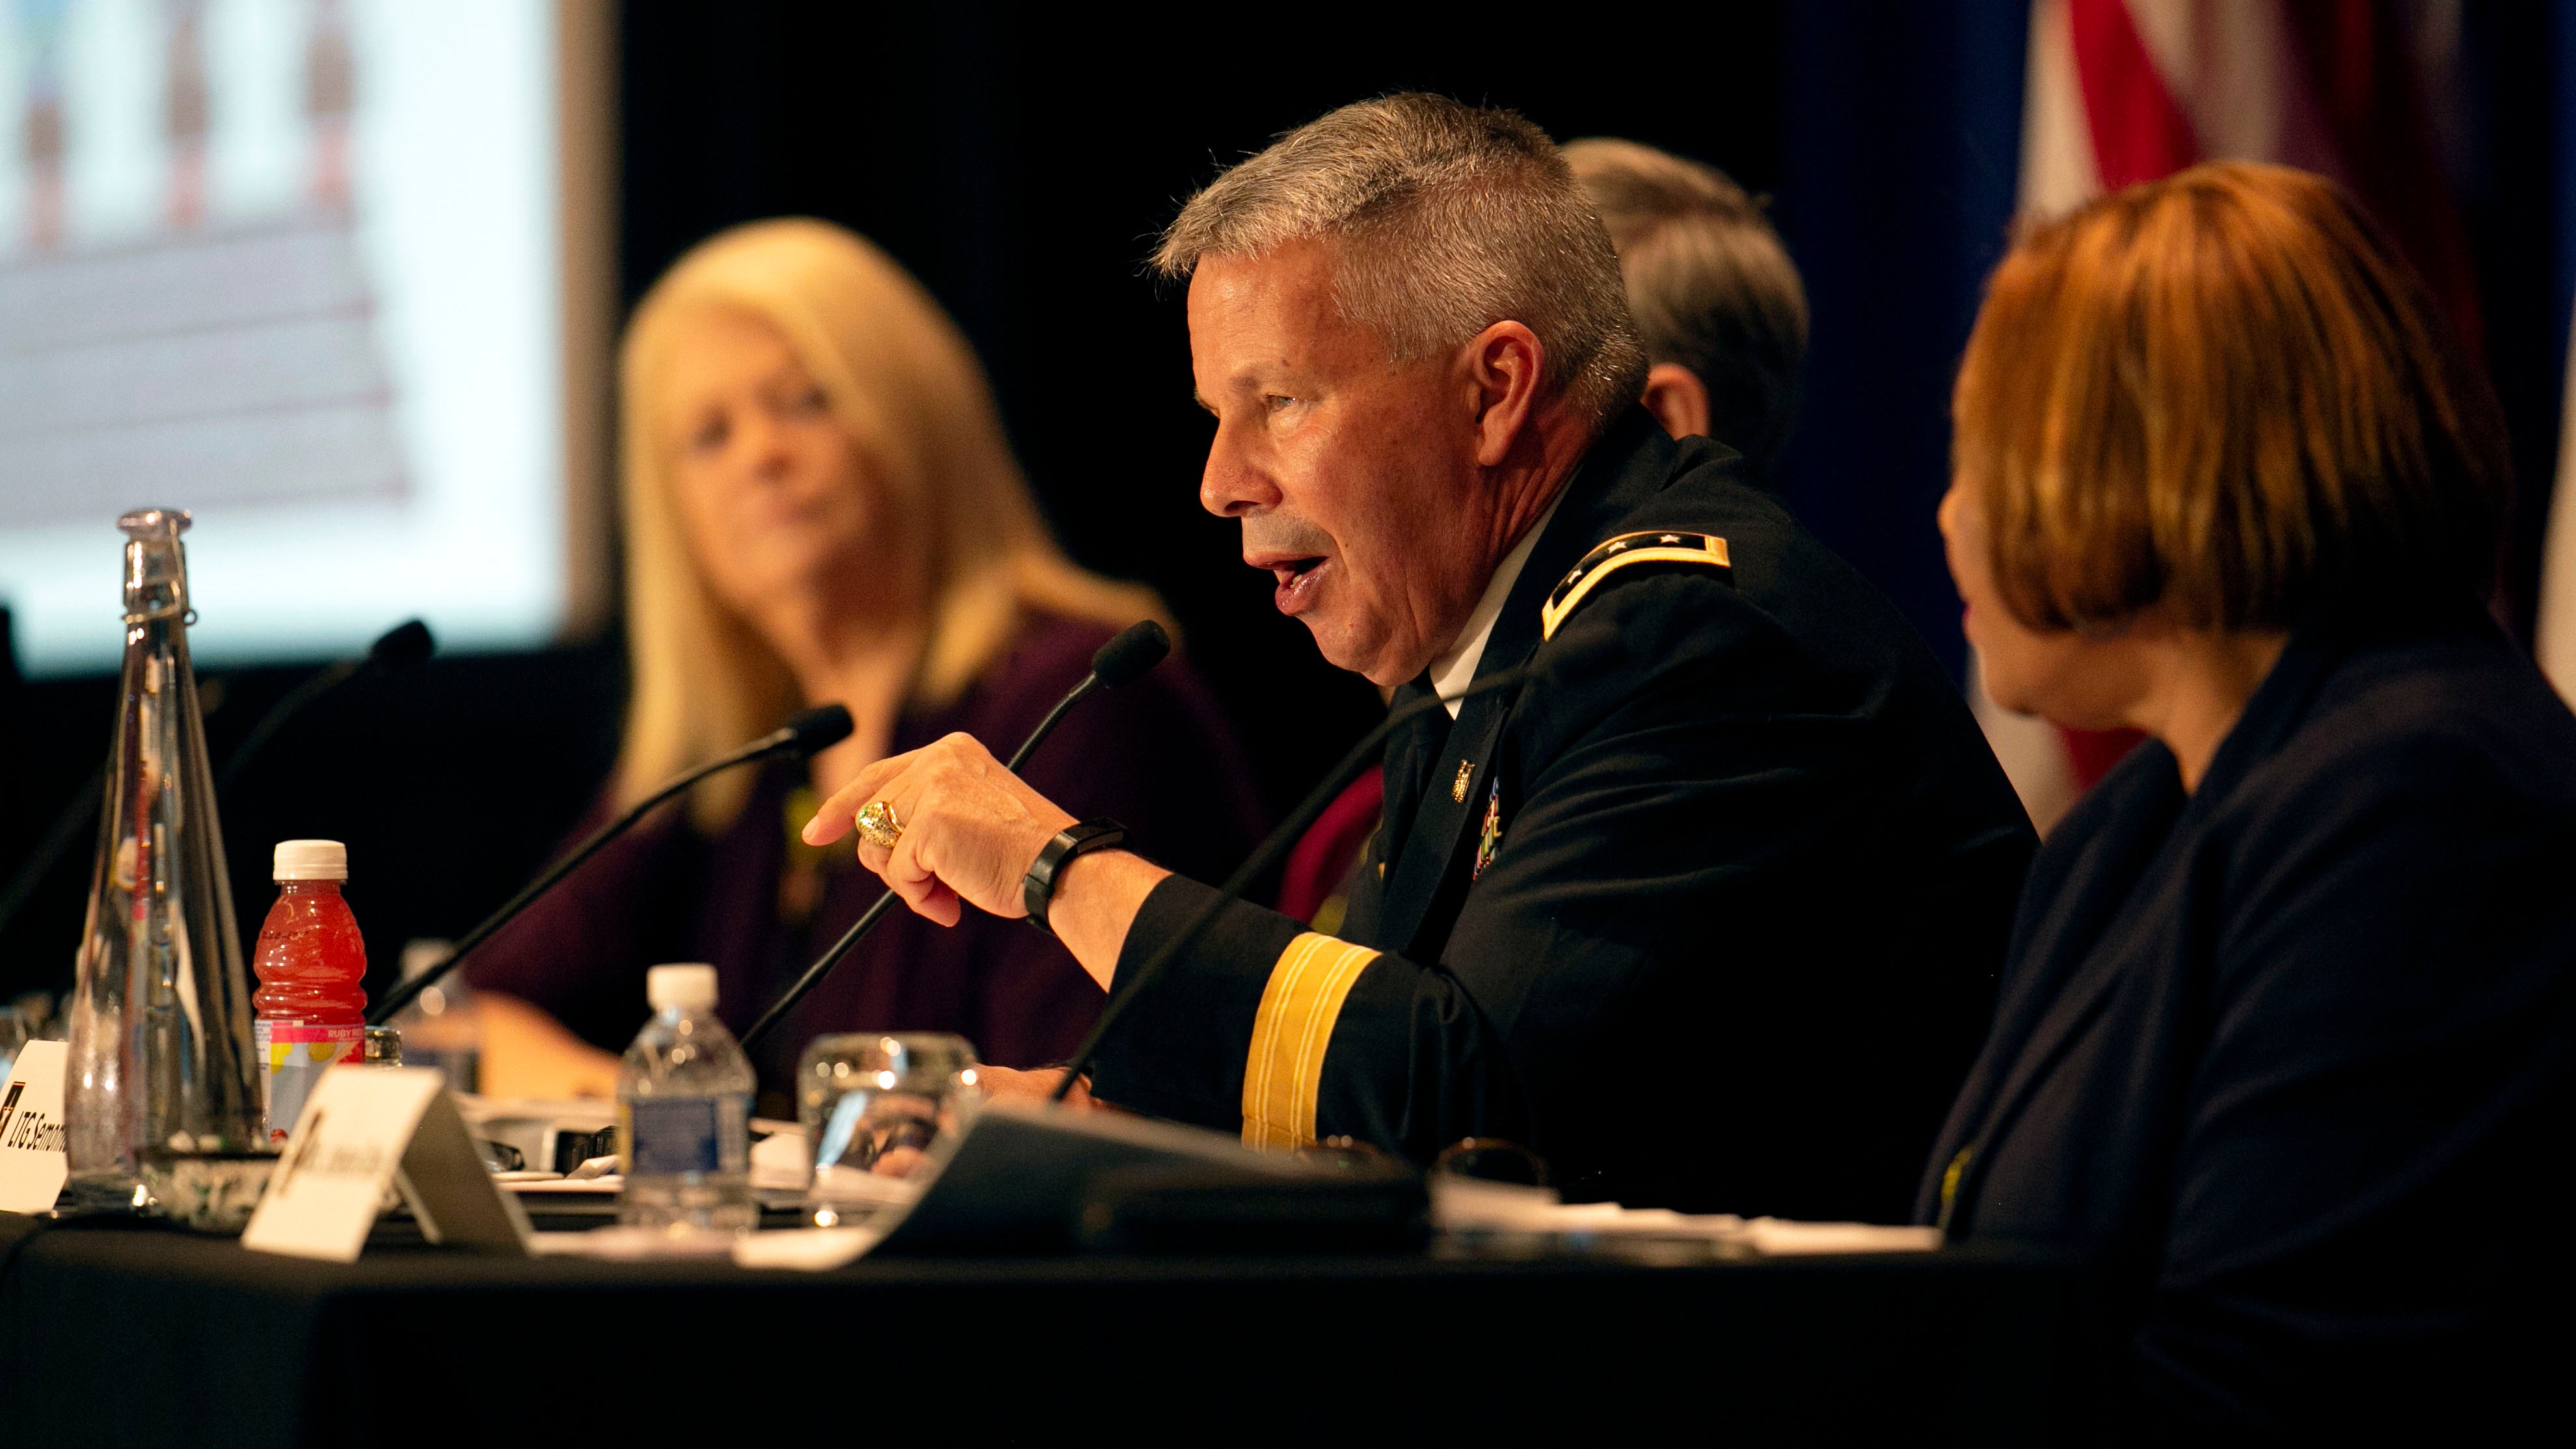 LTG Todd Semonite speaks at the Army Civilain Forum: Talent Management discussion at the 2019 AUSA Annual Meeting and Exposition at the Washington Convention Center on Oct. 16, 2019.